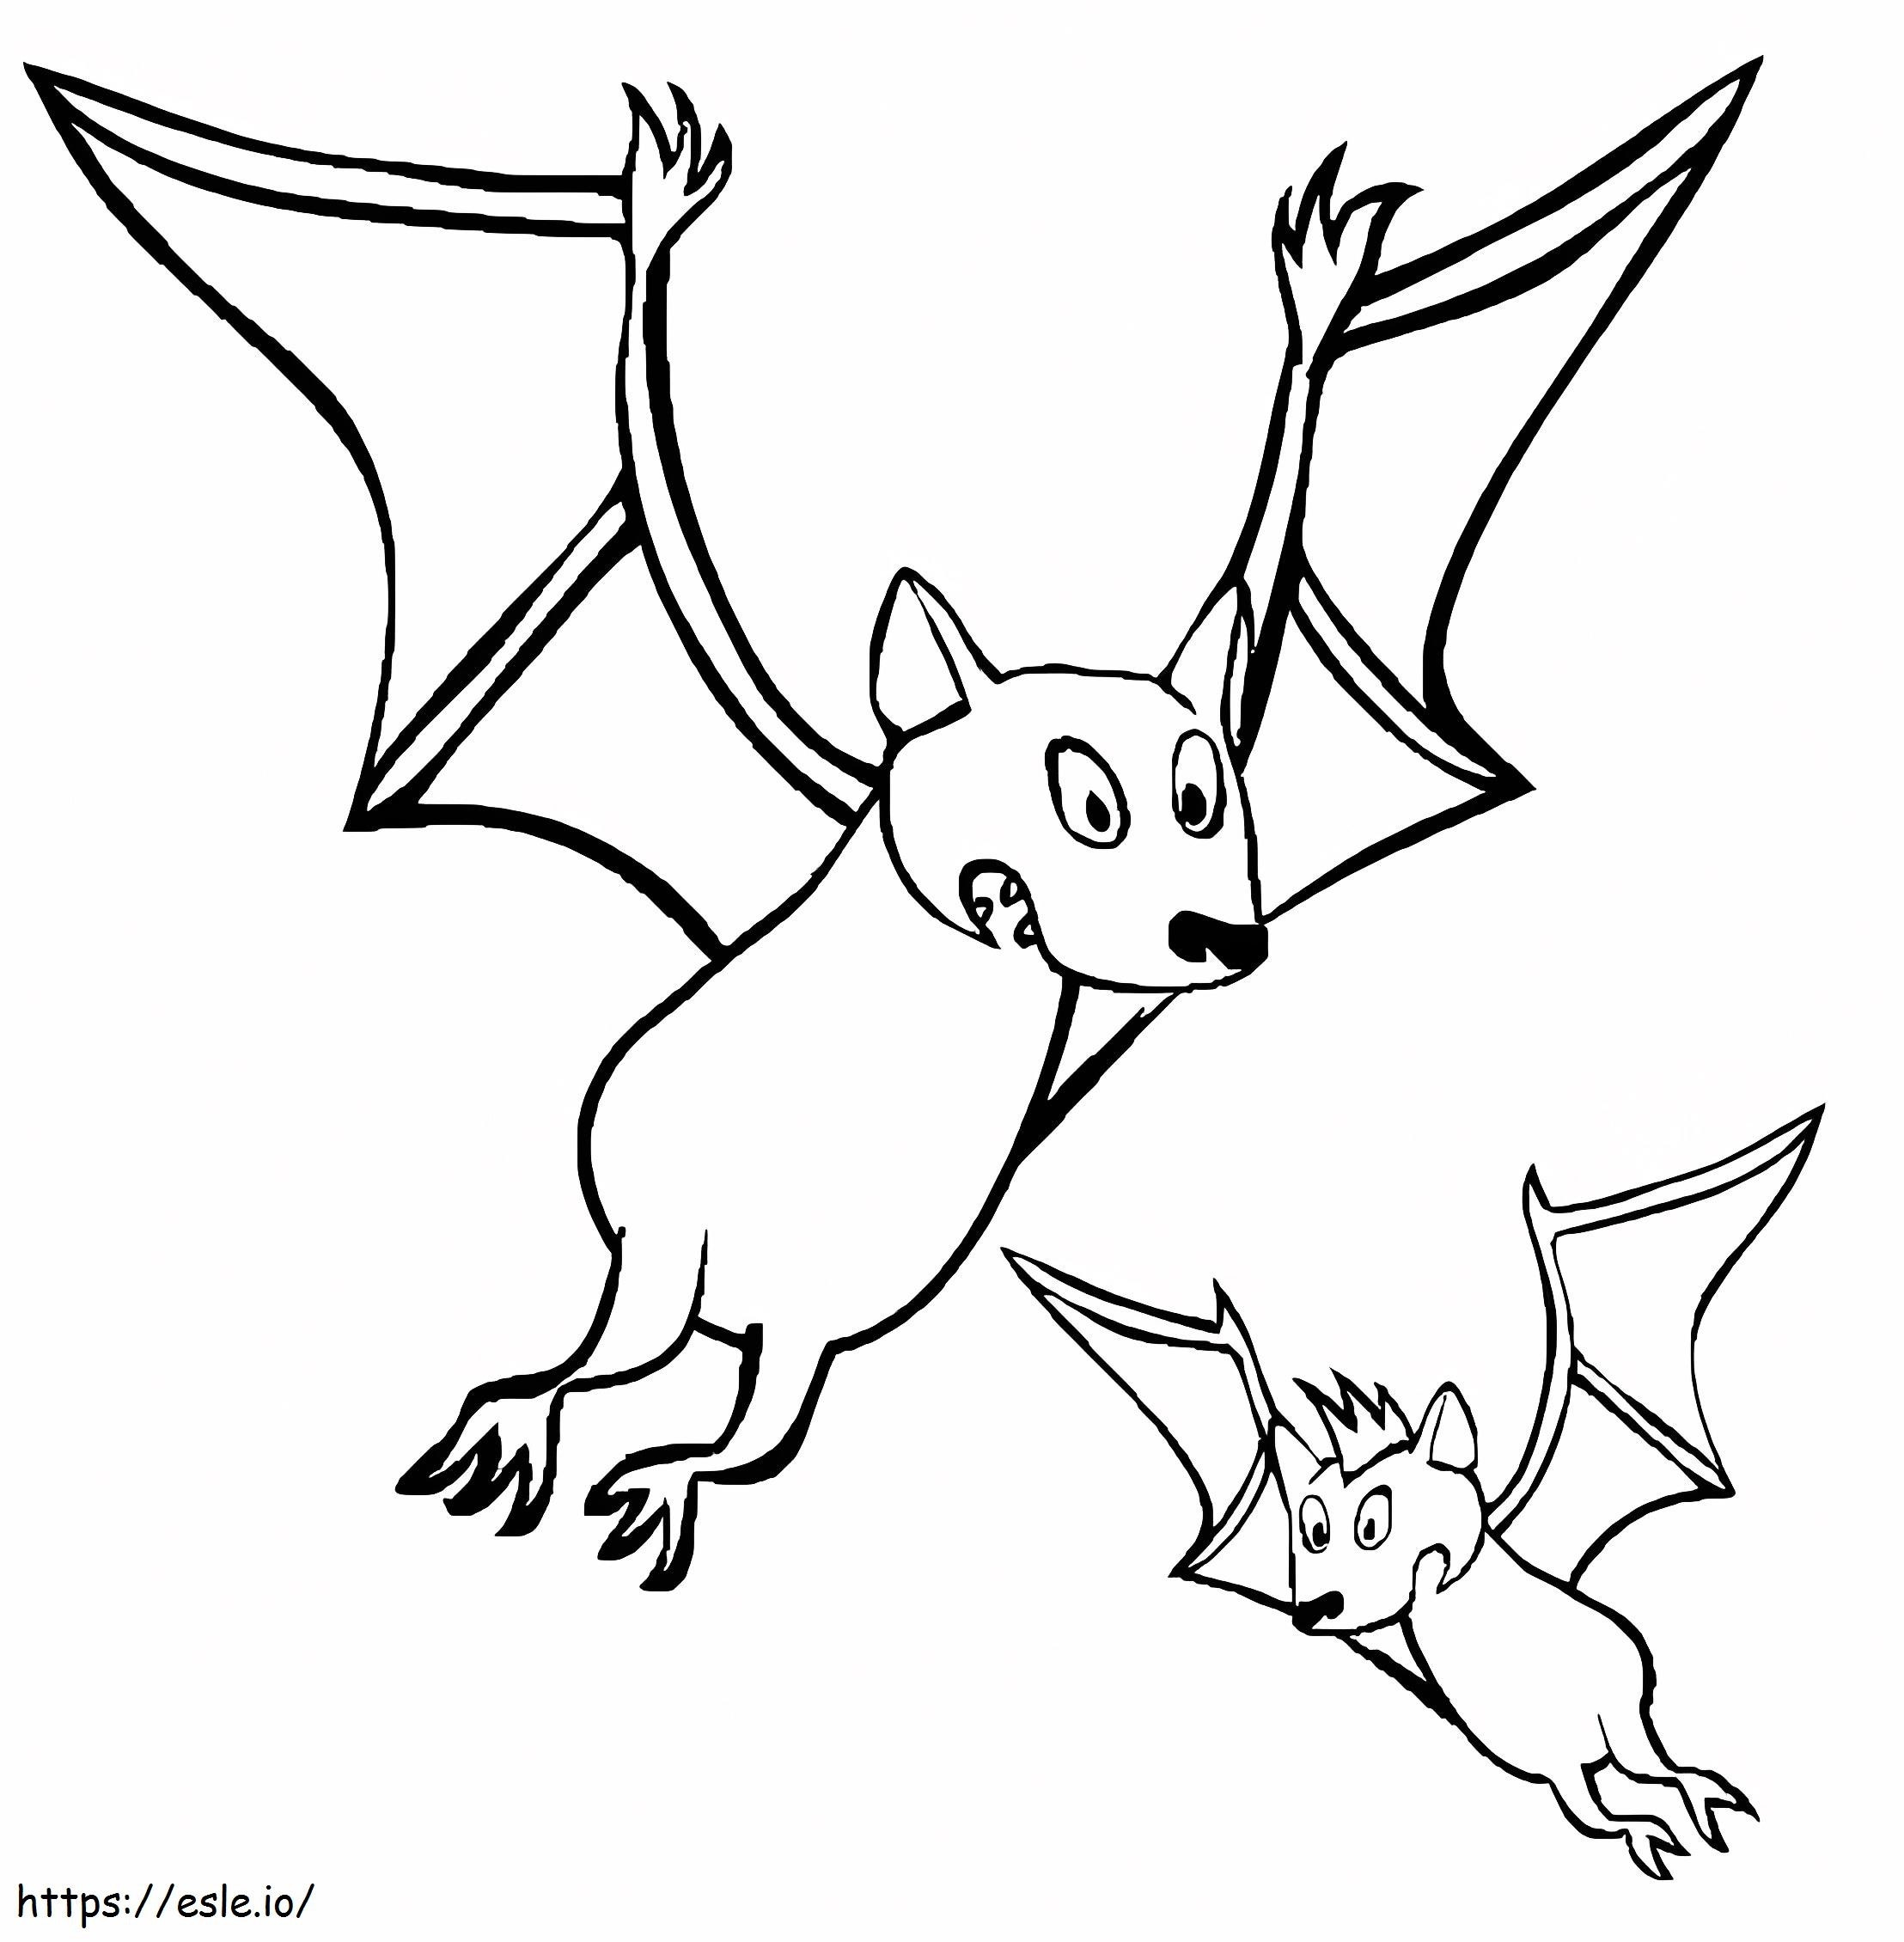 Two Cartoon Bats coloring page